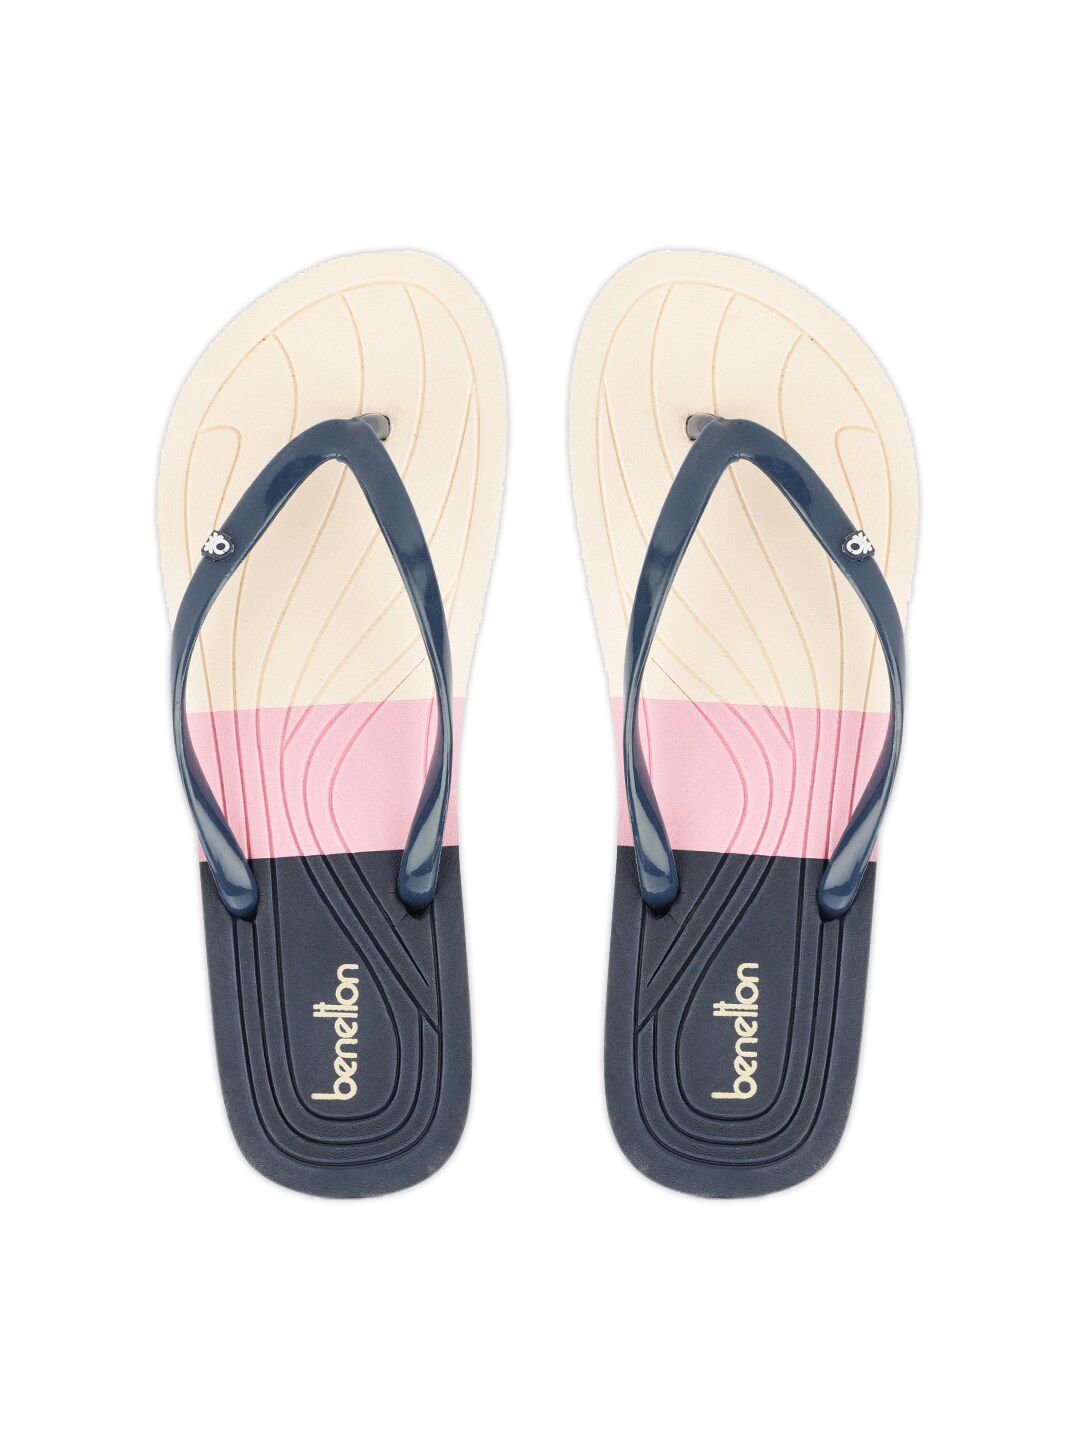 United Colors of Benetton Women Navy Blue & Peach-Coloured Colourblocked Thong Flip-Flops Price in India